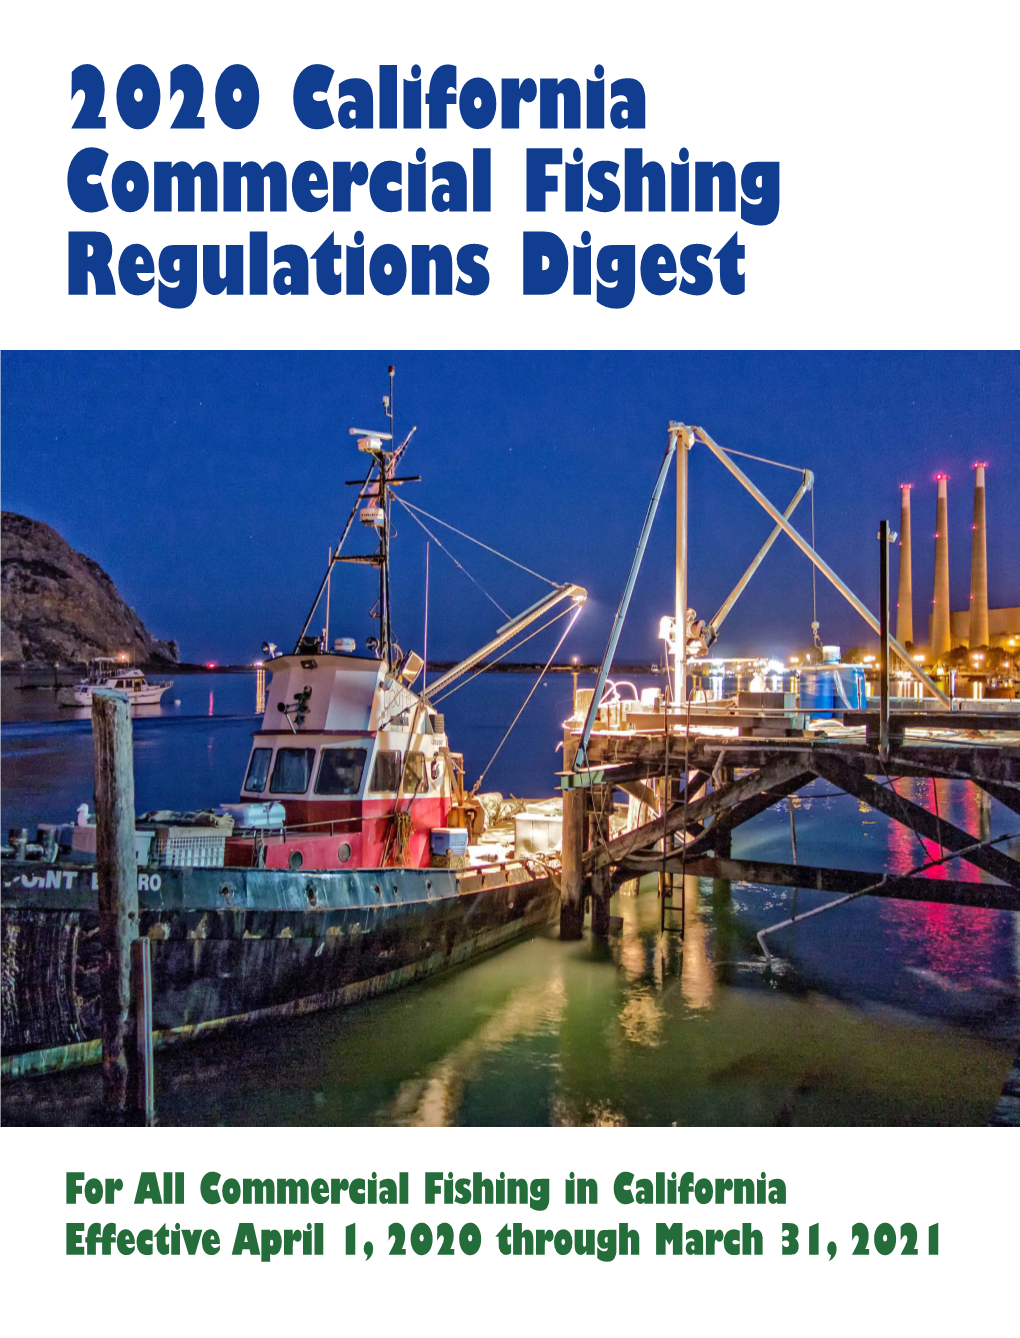 2020 California Commercial Fishing Regulations Digest